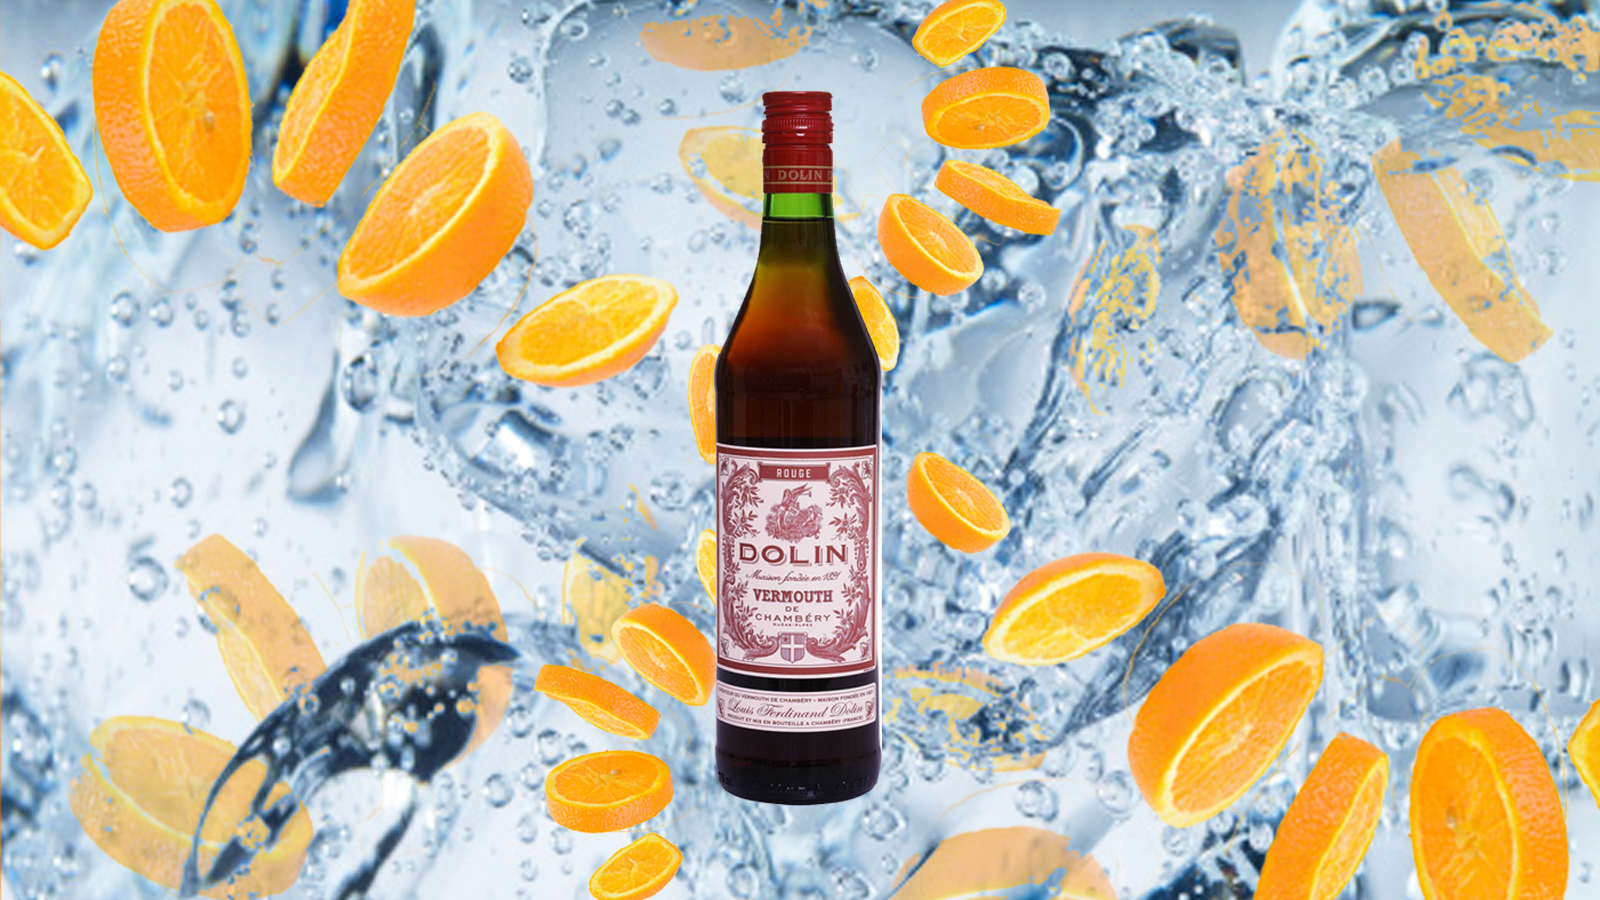 A photo illustration displays a bottle of Dolin red vermouth juxtaposed against a close-up shot of tonic water and ice cubes, with orange slices arranged in a psychedelic spiral pattern. 